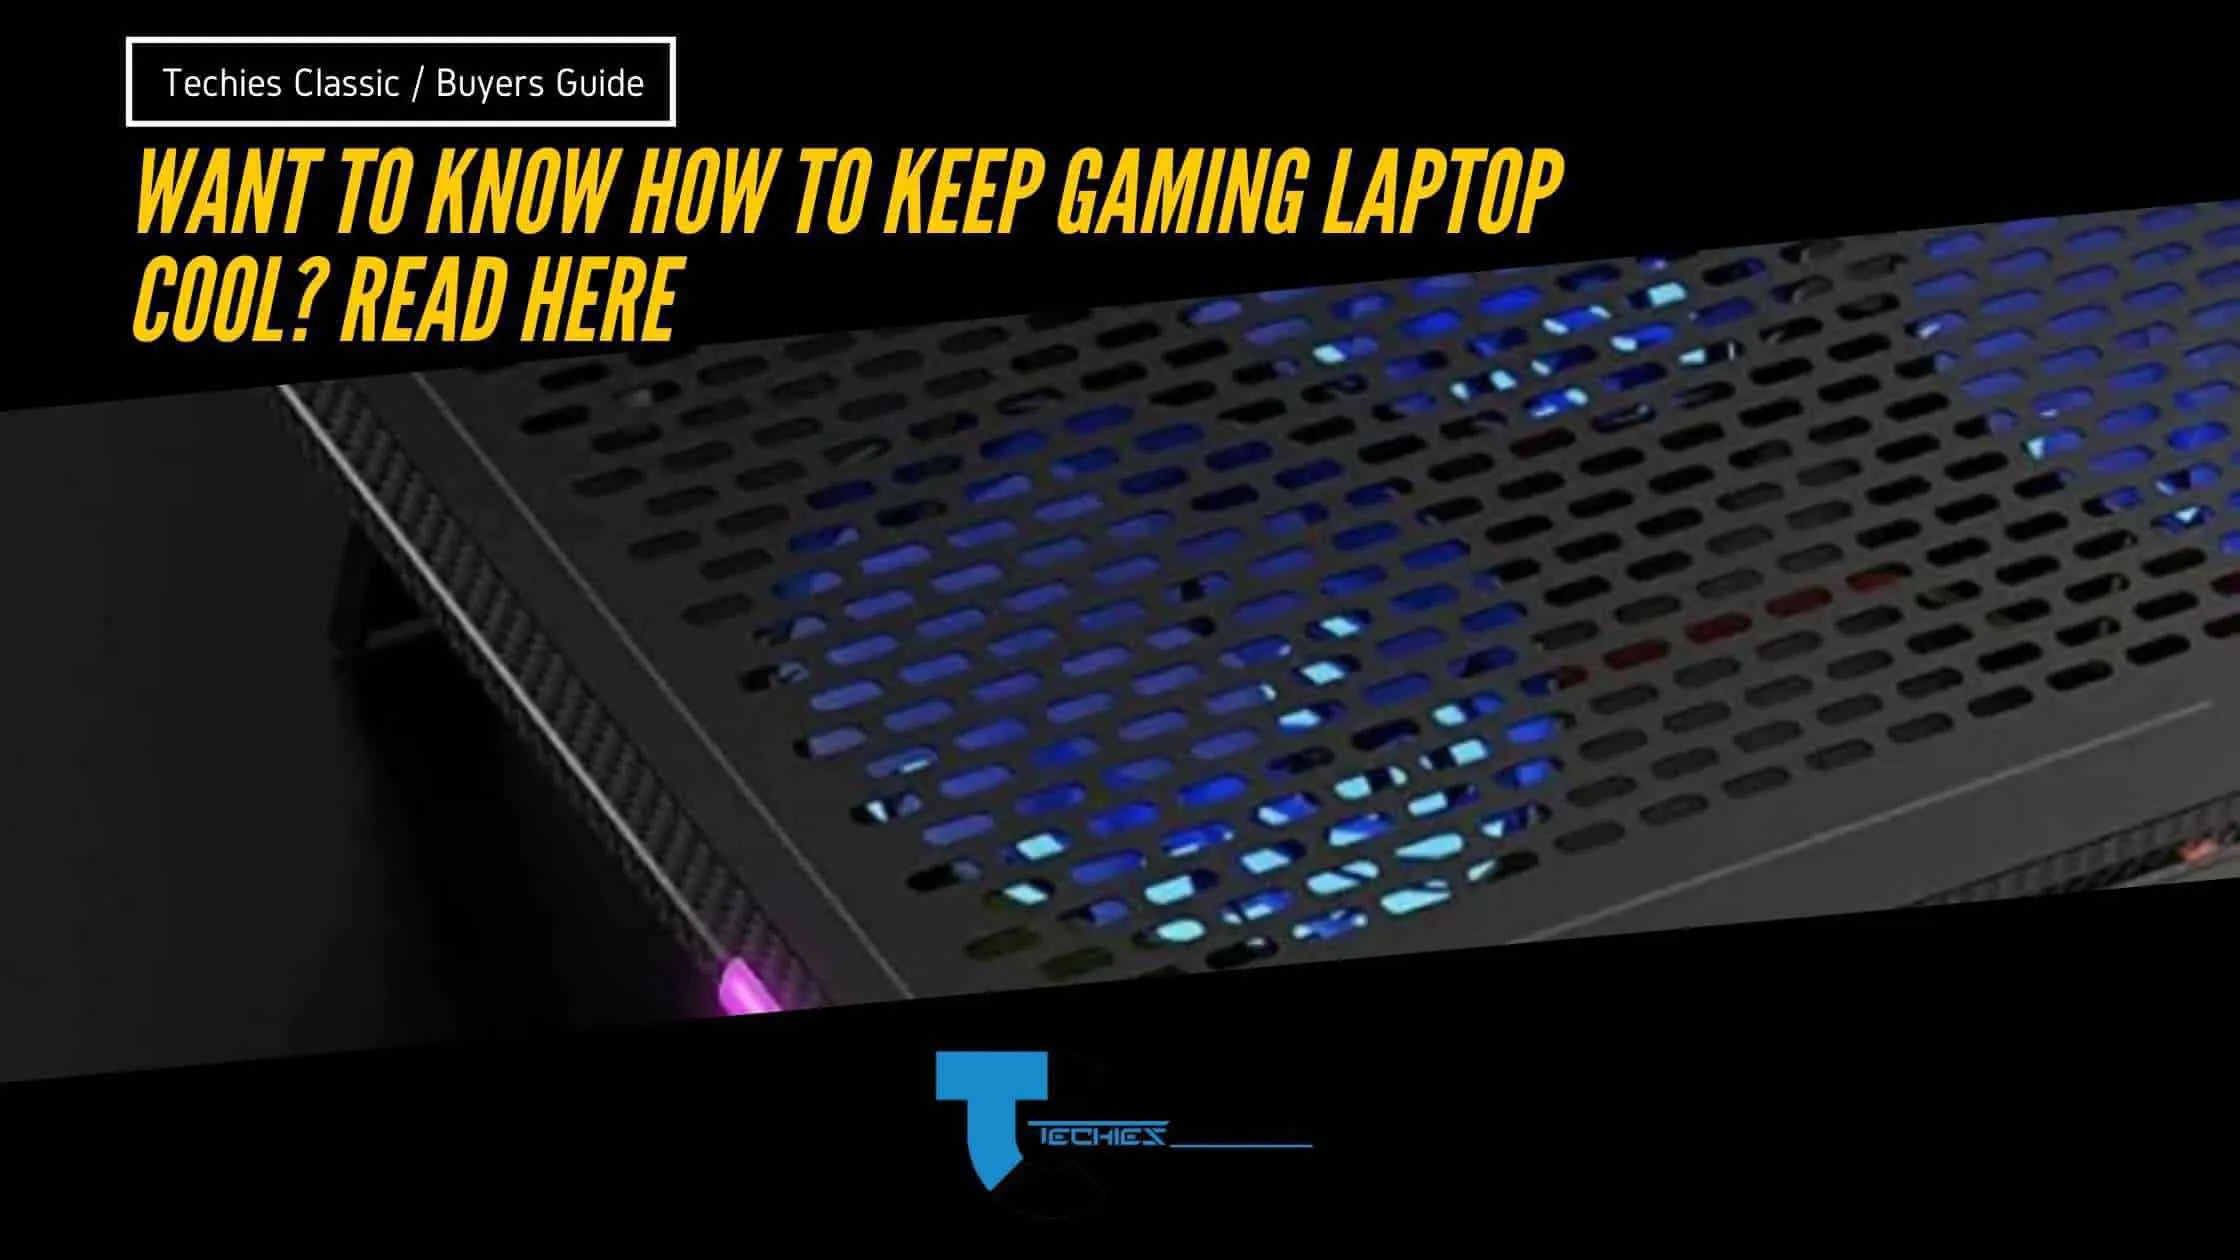 How To Keep Gaming Laptop Cool? 11 effective methods